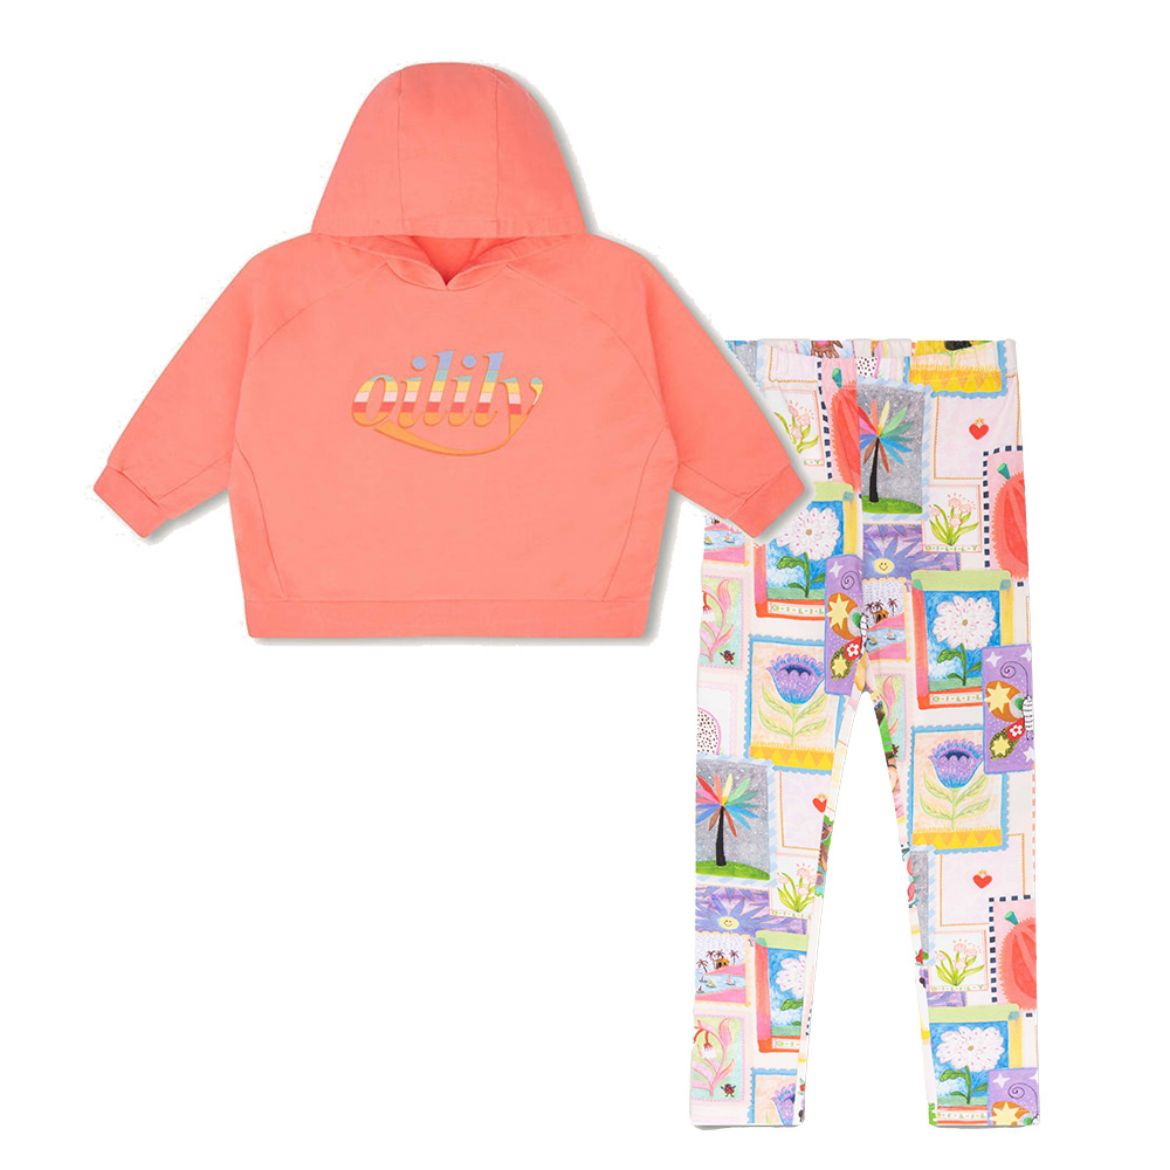 Picture of Oilily Girls Hiphop Hoody & Peppy Leggings Set